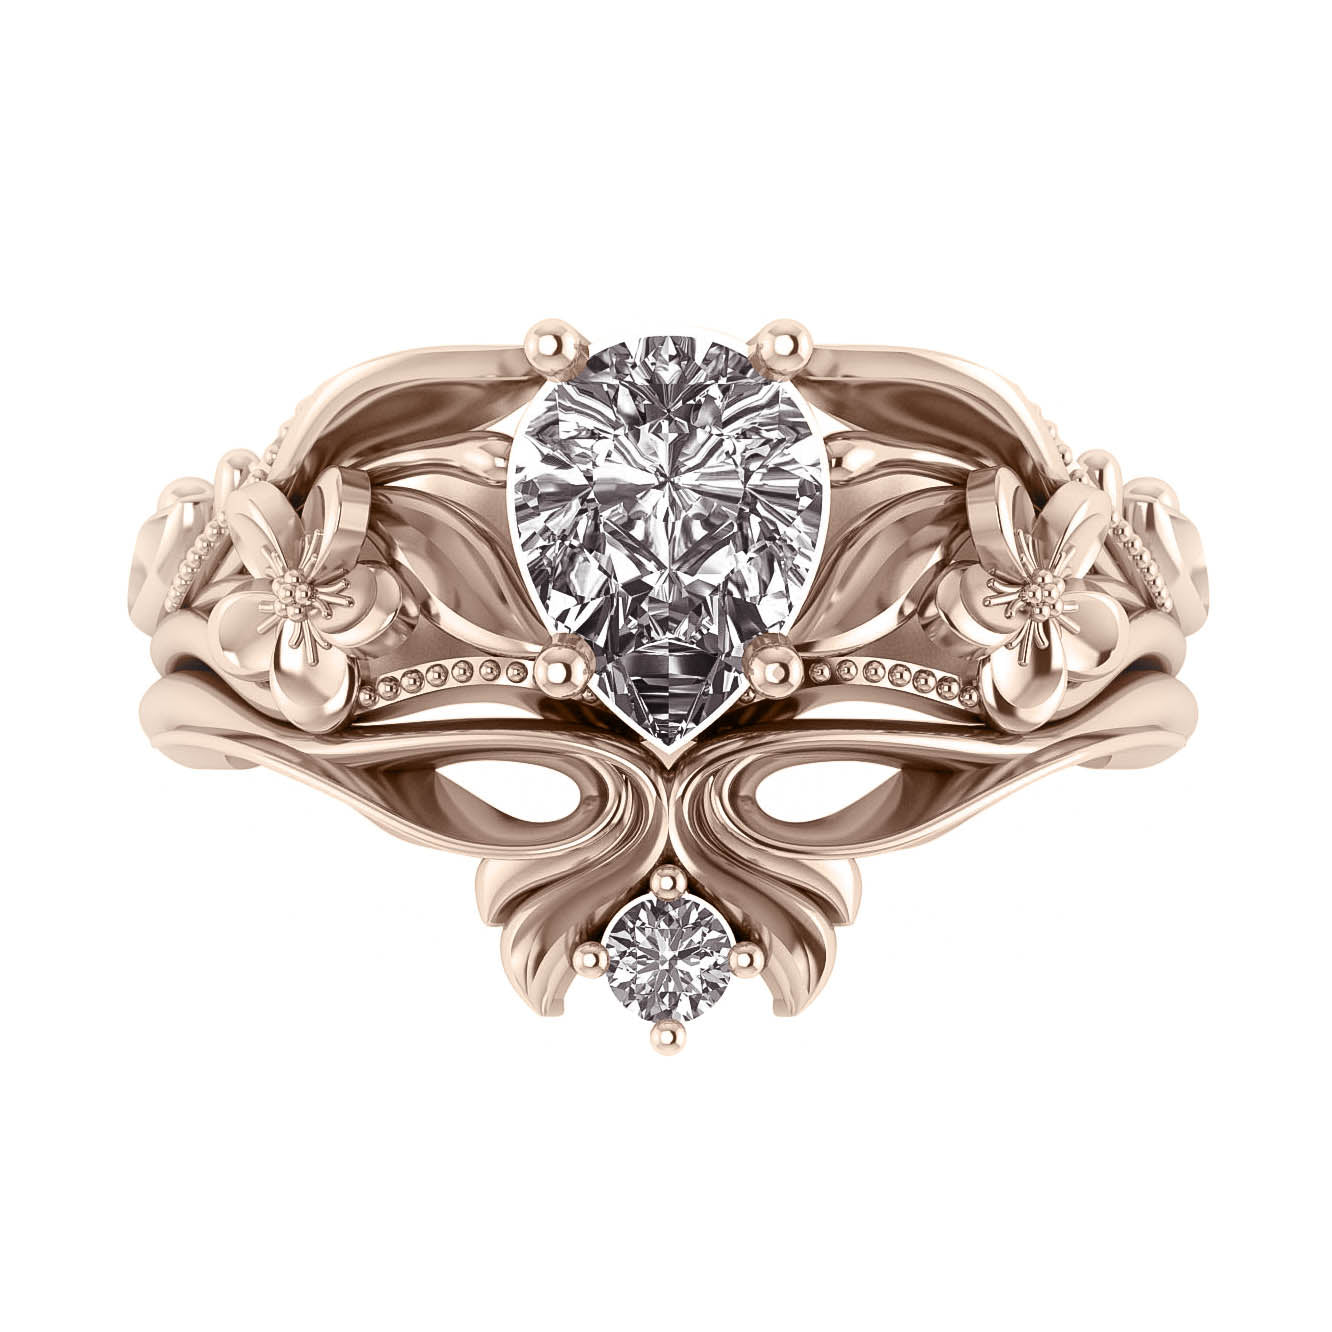 Eloise | floral bridal ring set - pear cut engagement ring & matching band - Eden Garden Jewelry™